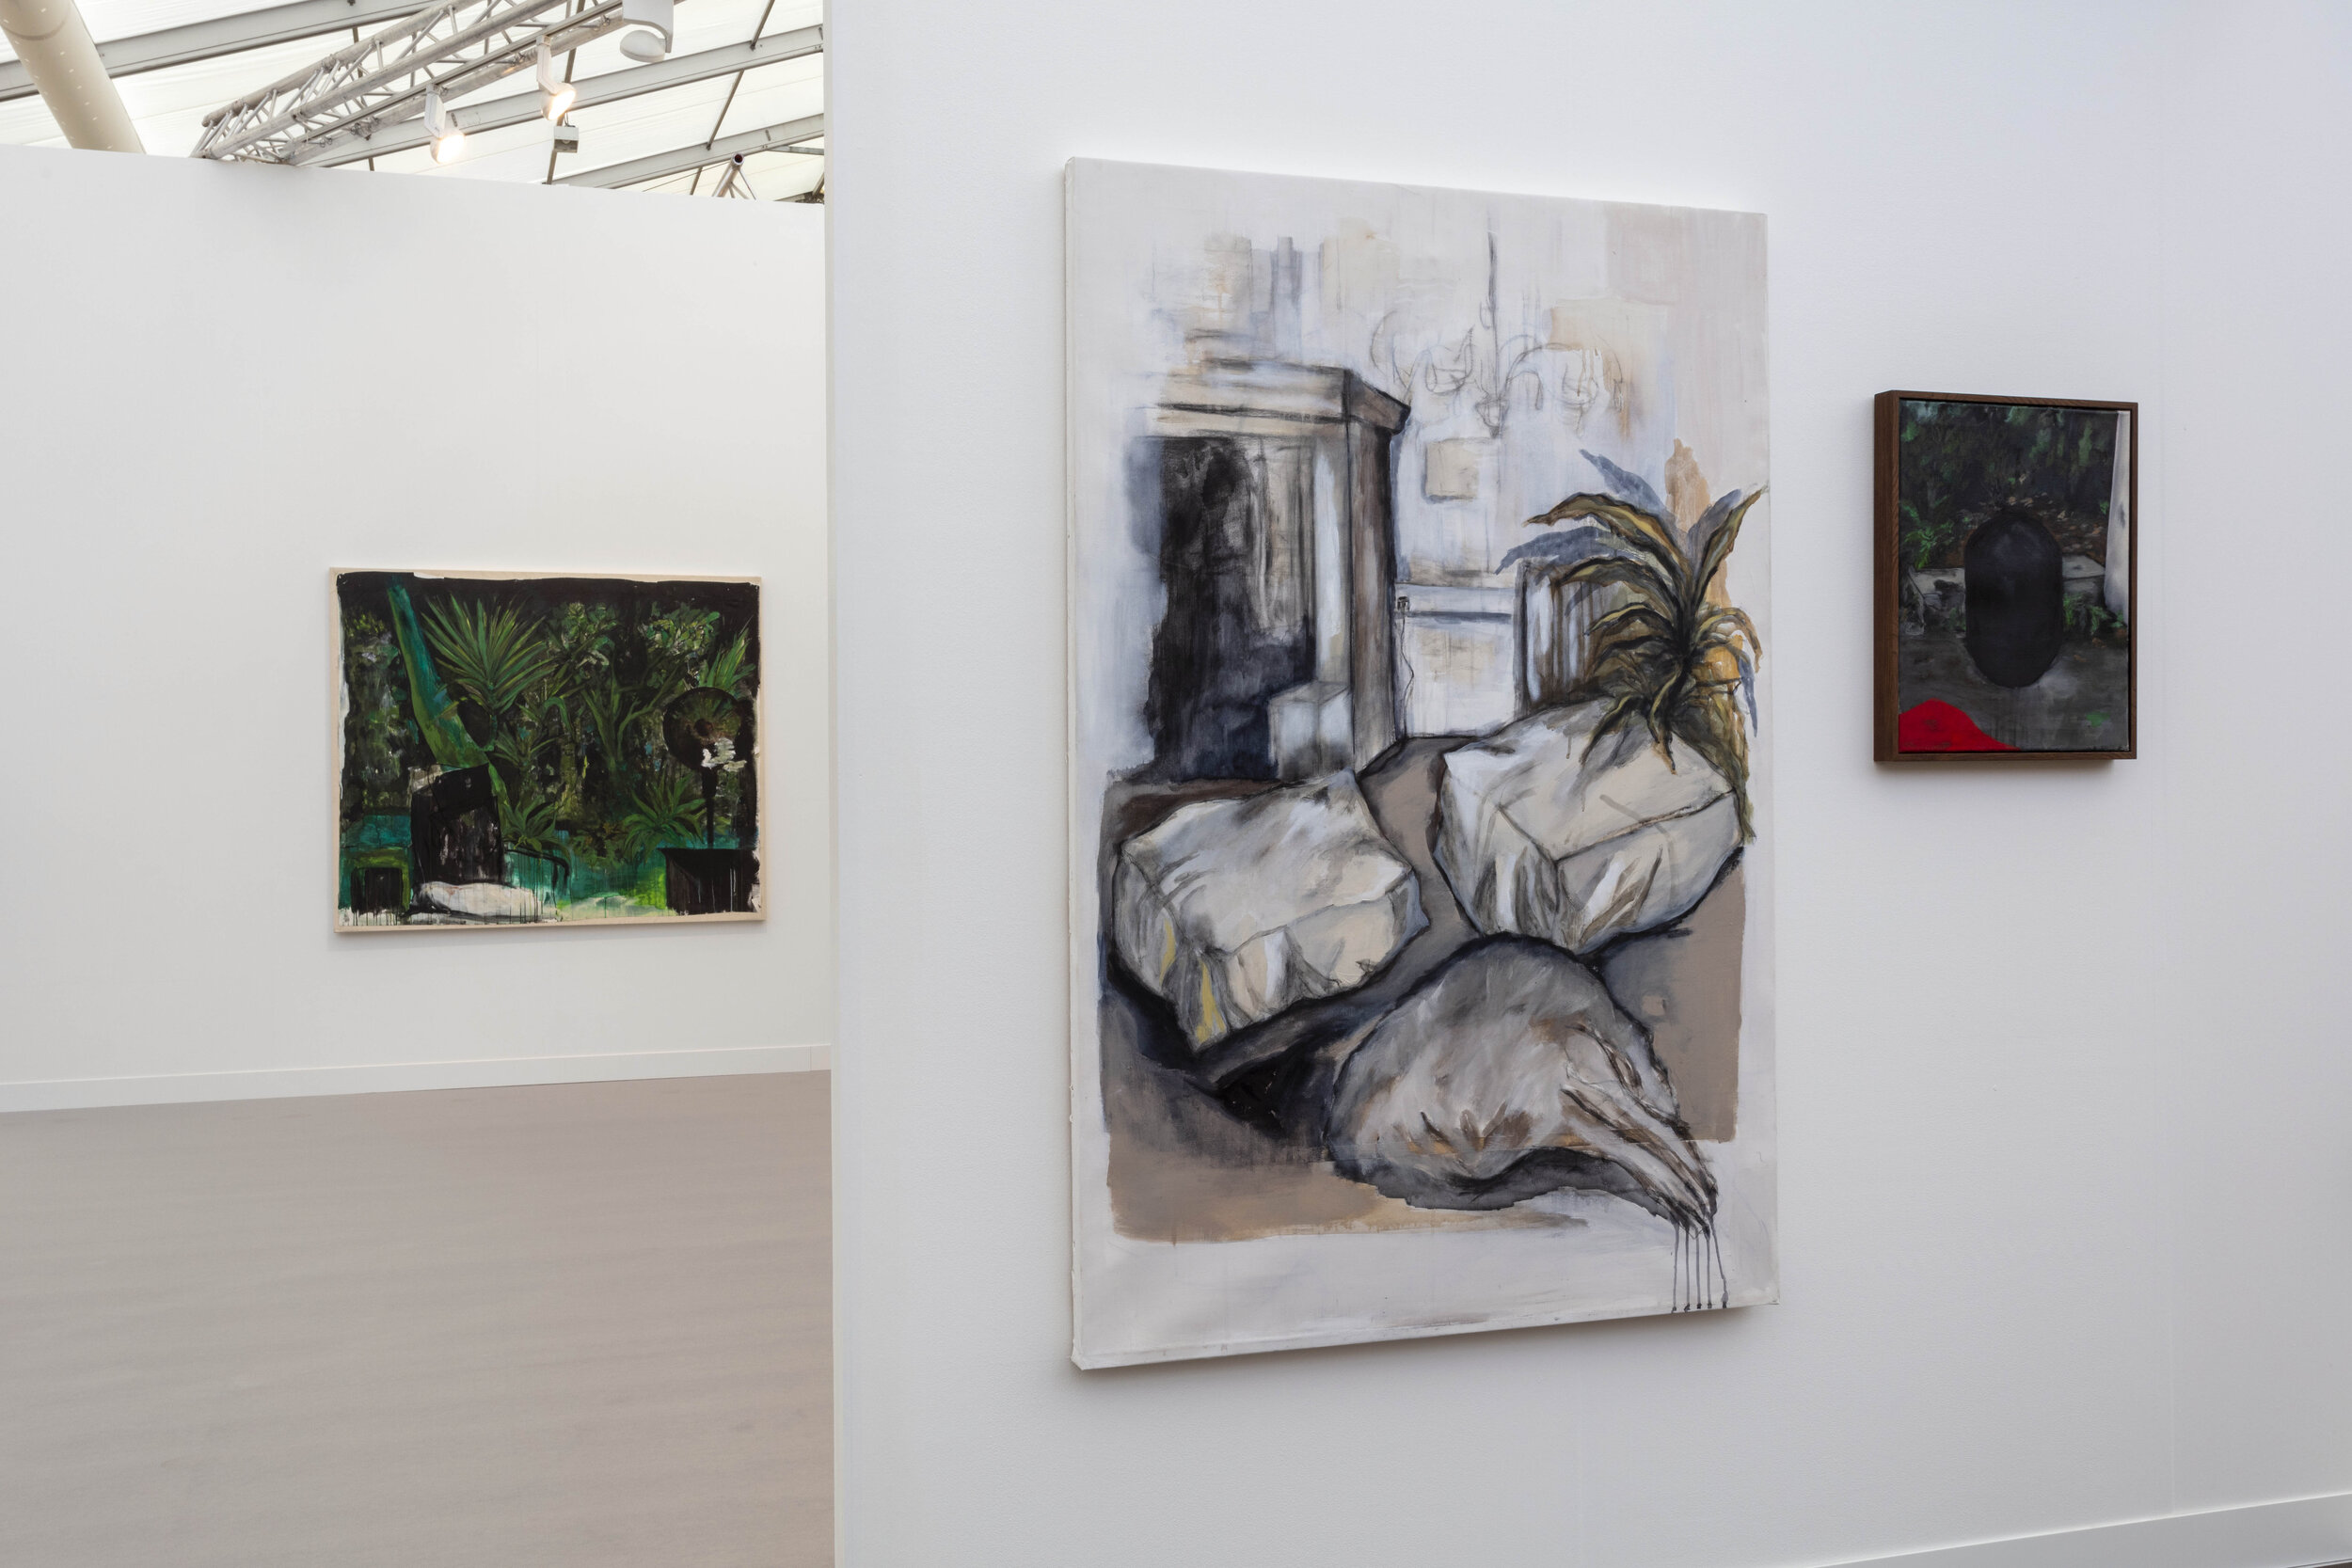  Installation View of Jungle (h135x w165cm), Living Room 2 (150 x 100 cm ) and MonolithIII each mixed media on paper 